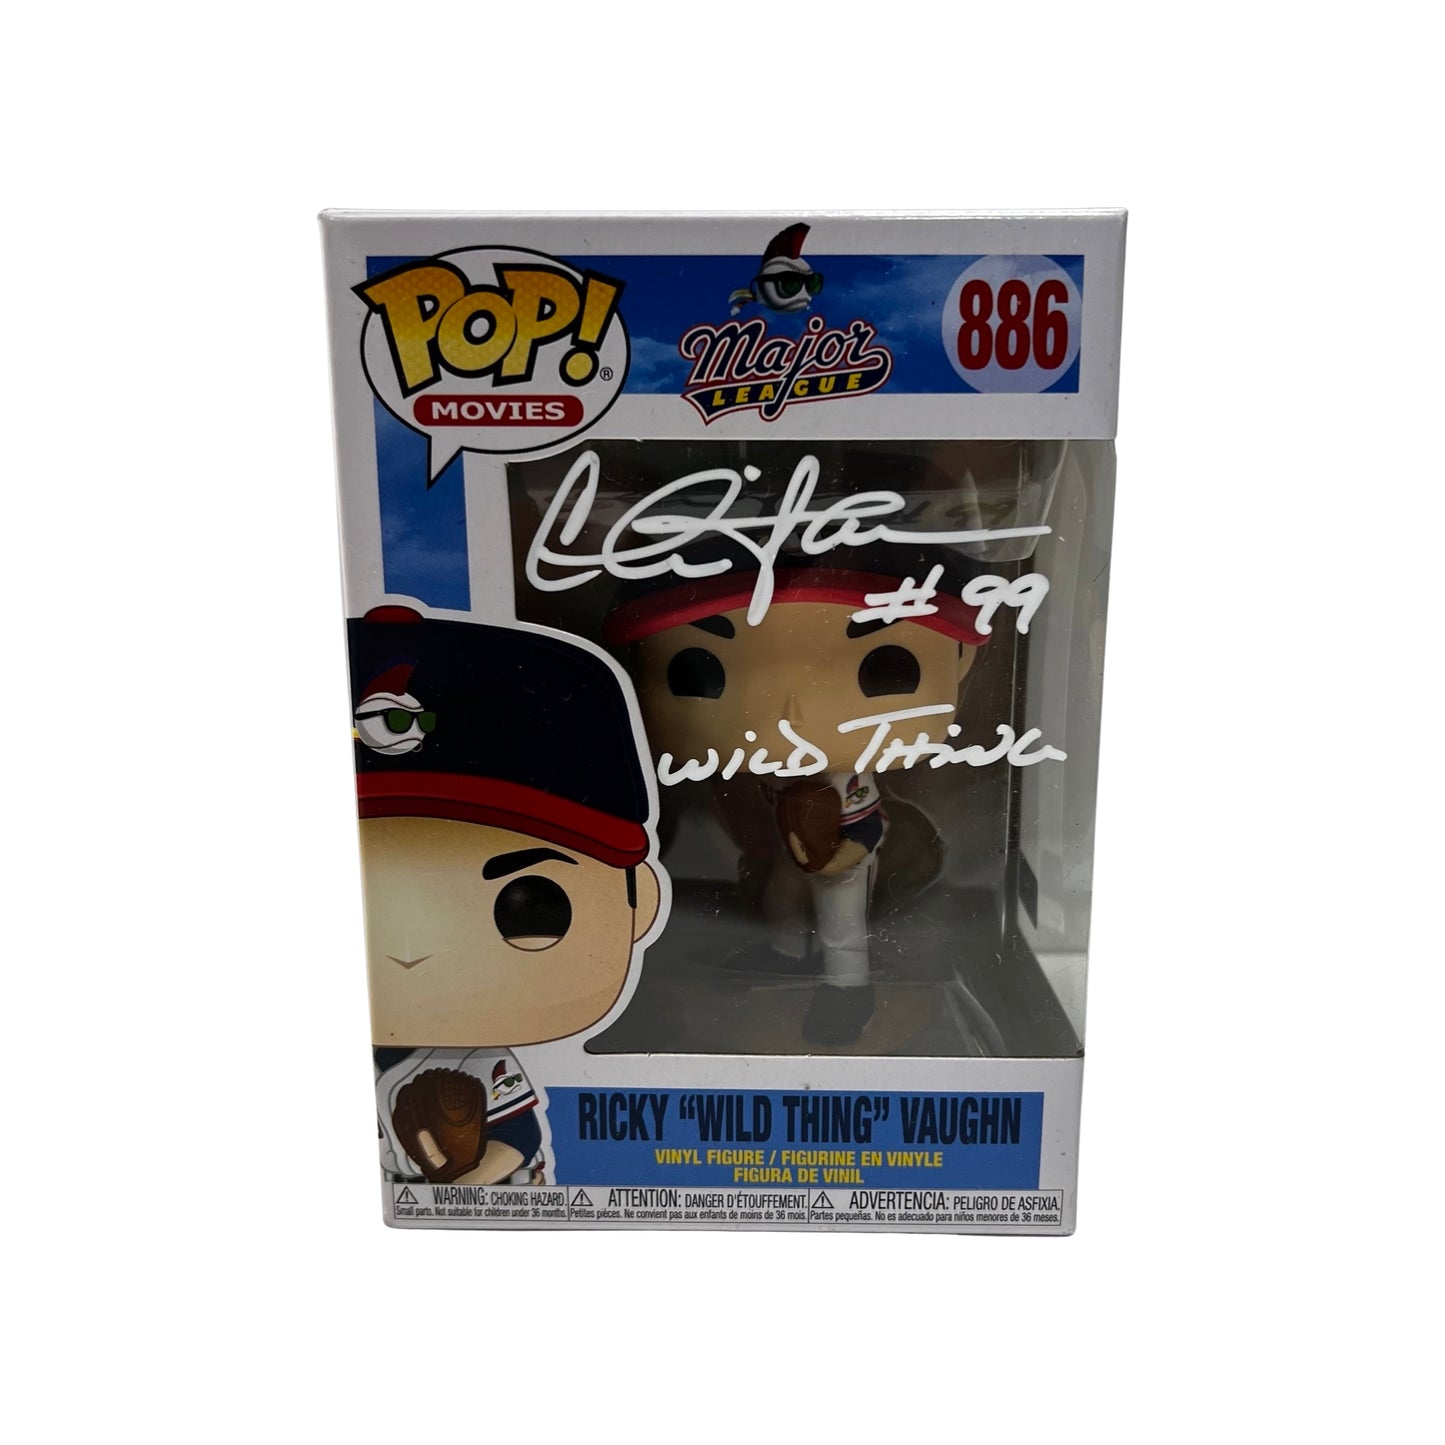 Charlie Sheen Autographed Major League Ricky “Wild Thing” Vaughn Funko Pop “Wild Thing" Inscription White Ink Steiner CX